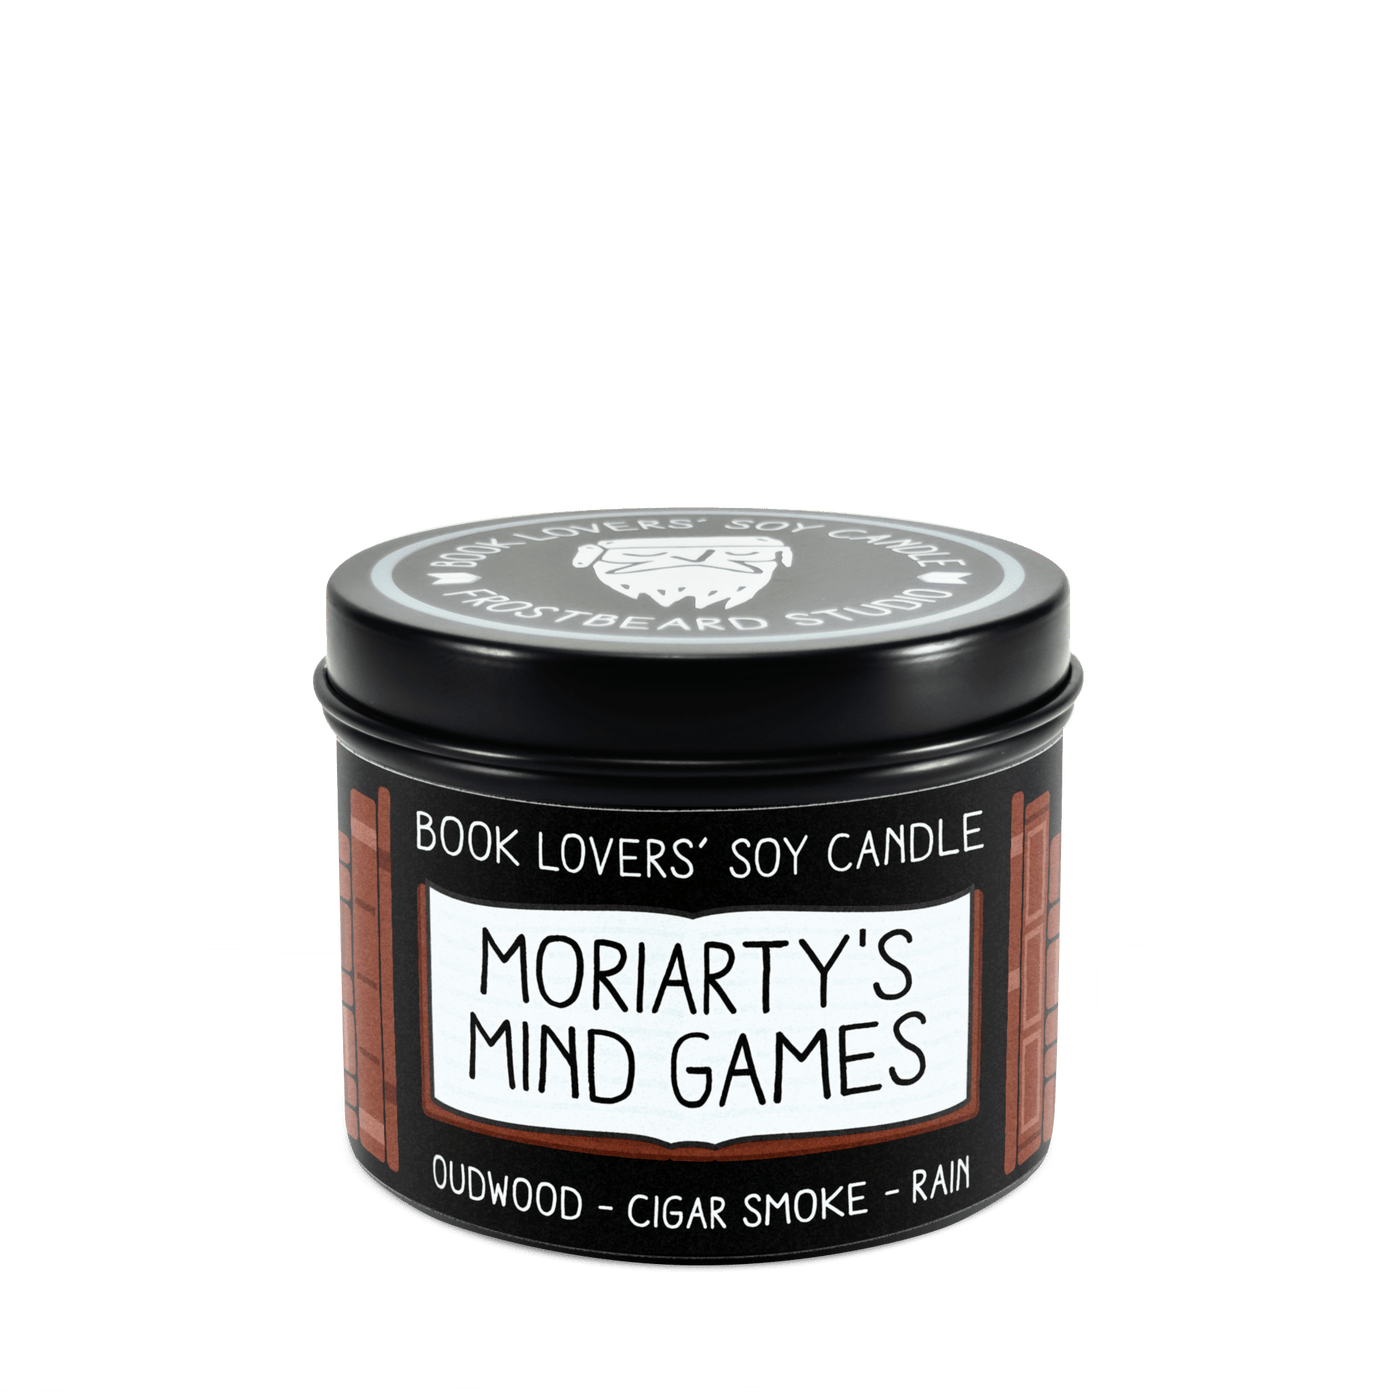 Moriarty's Mind Games - 4 oz Tin - Book Lovers' Soy Candle - Frostbeard Studio